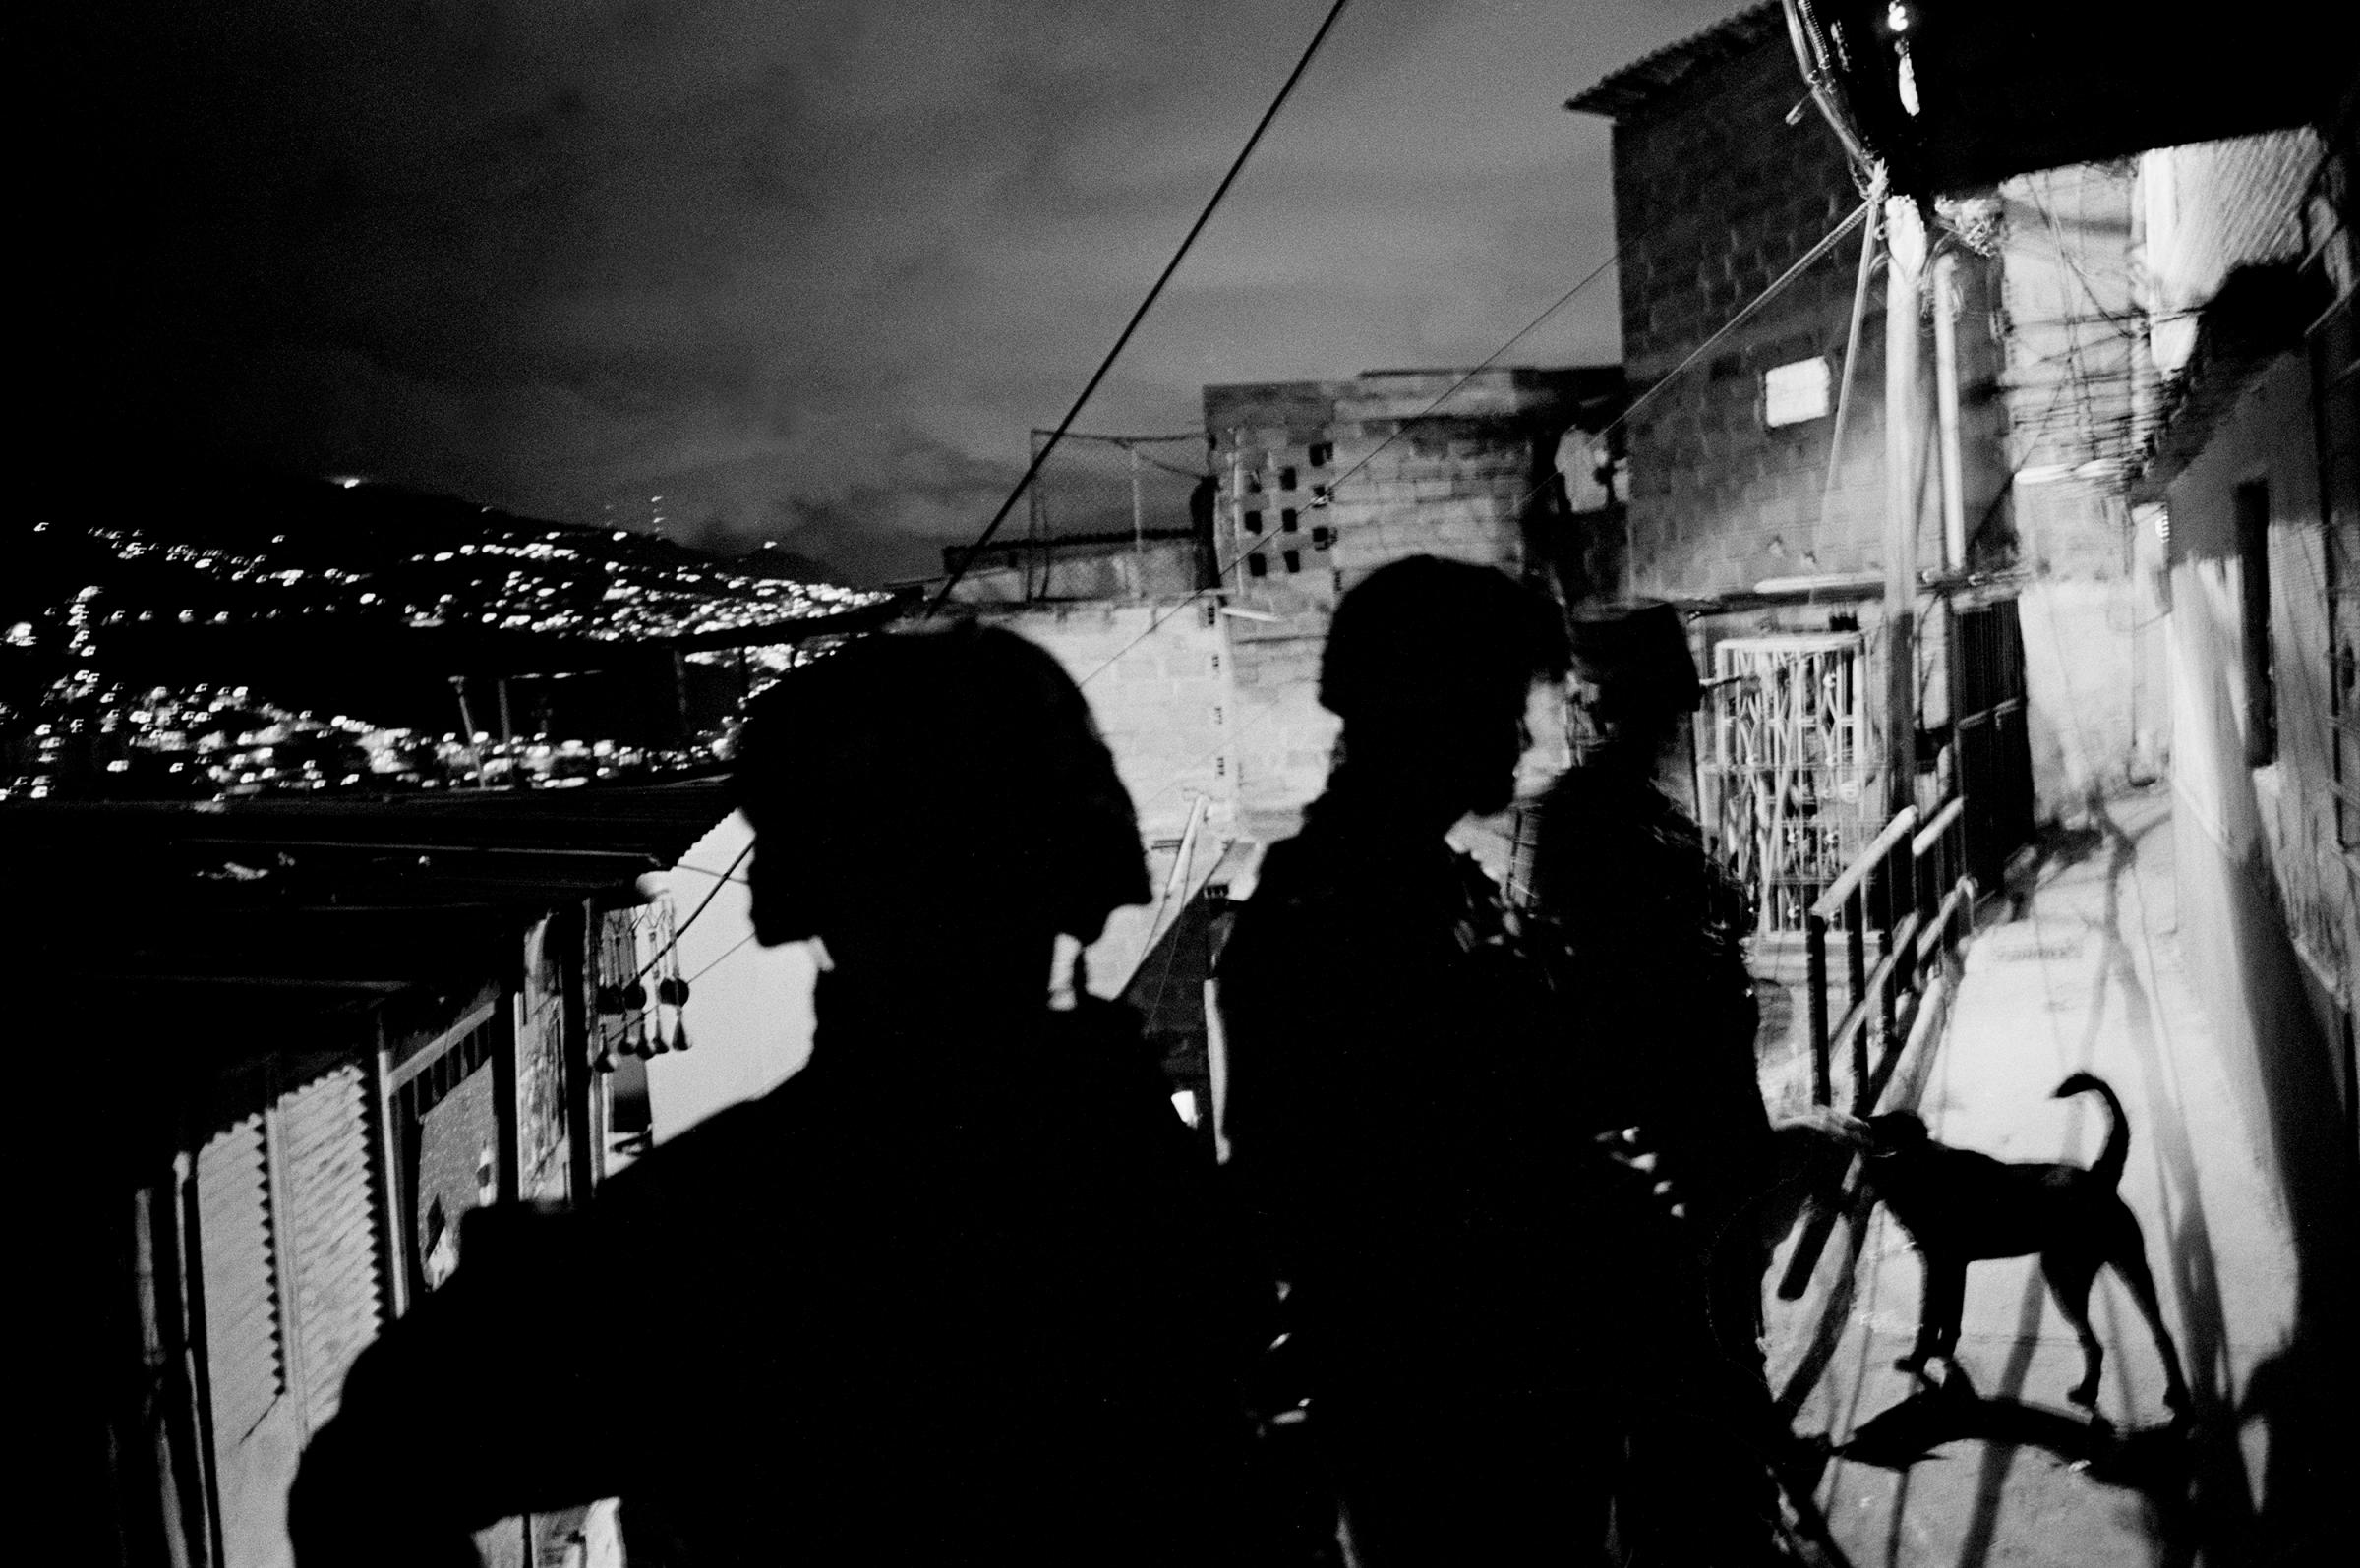 A group of soldiers patrol the streets of "La comuna" number 13, a neighborhood with many FARC militants, and a stronghold for the distribution of cocaine, Medellin, Colombia, 2011.